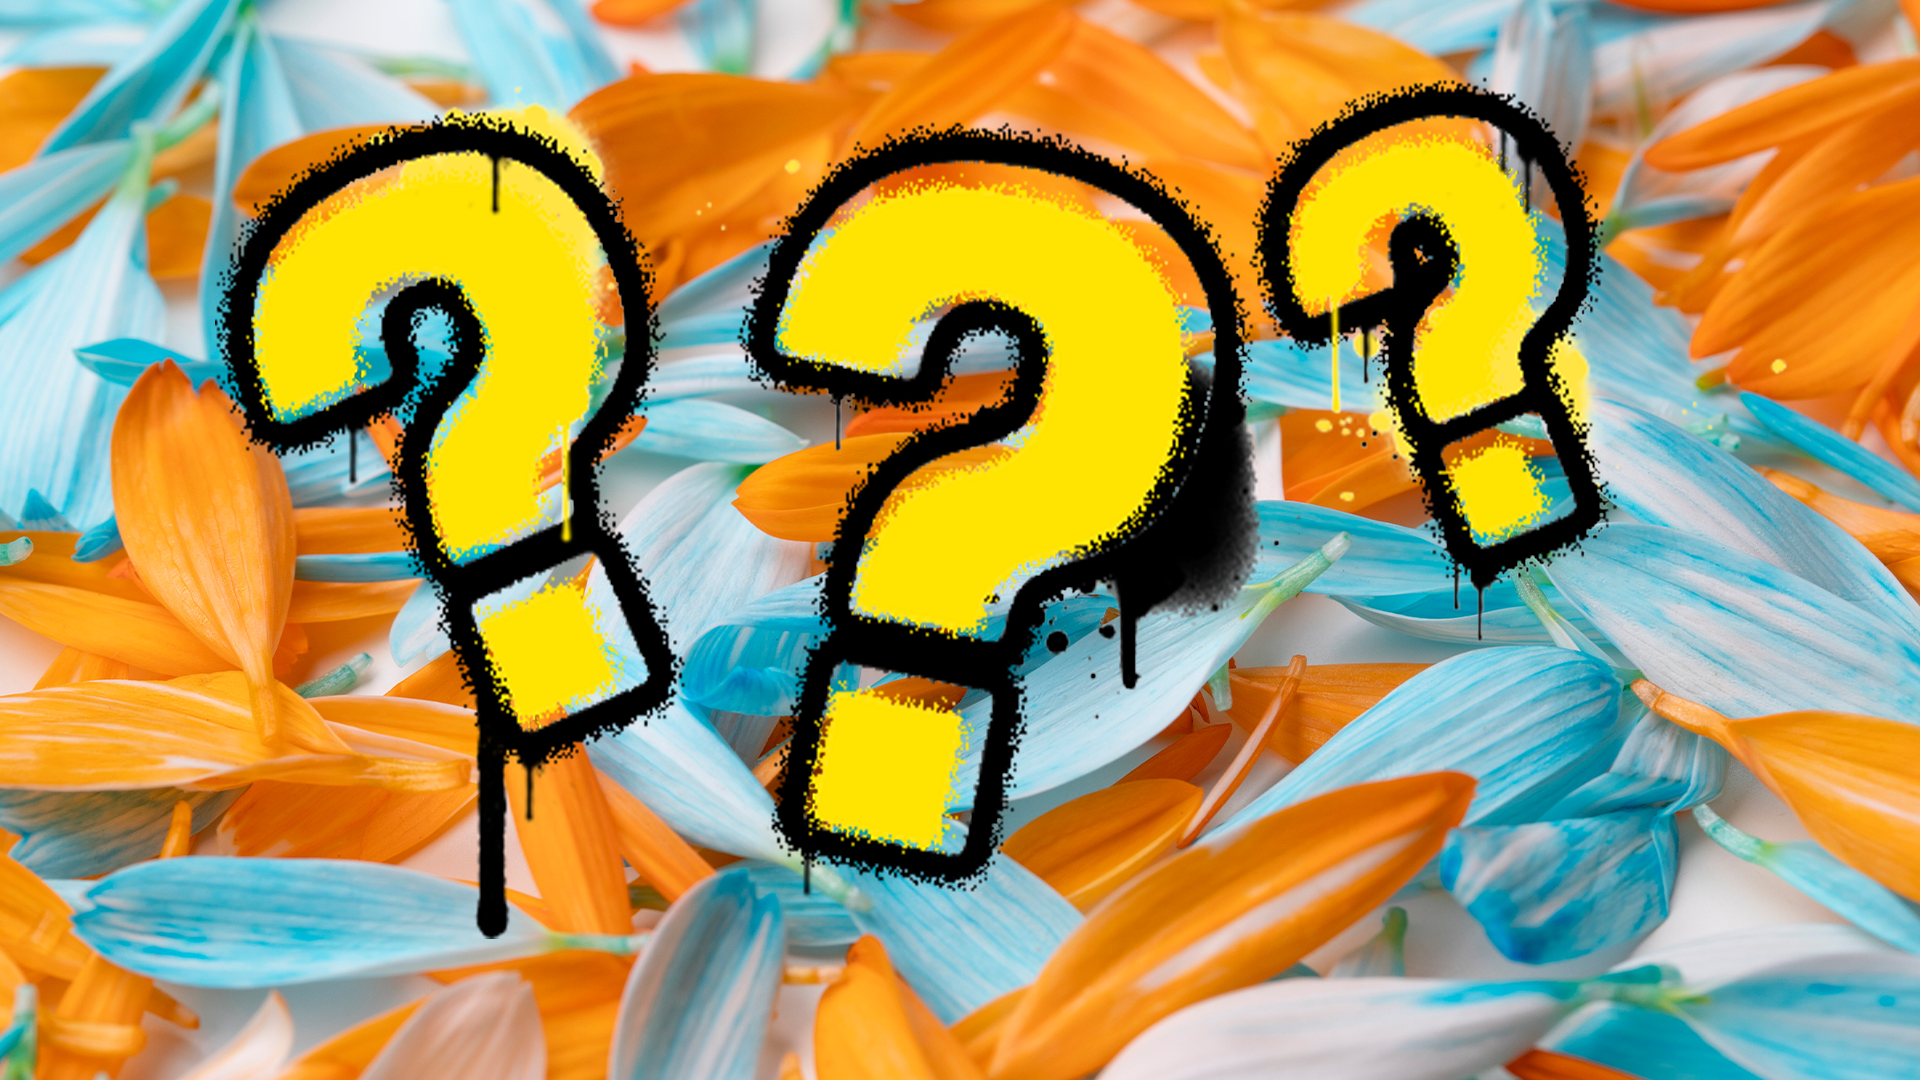 Blue and orange flower background with graffiti question marks